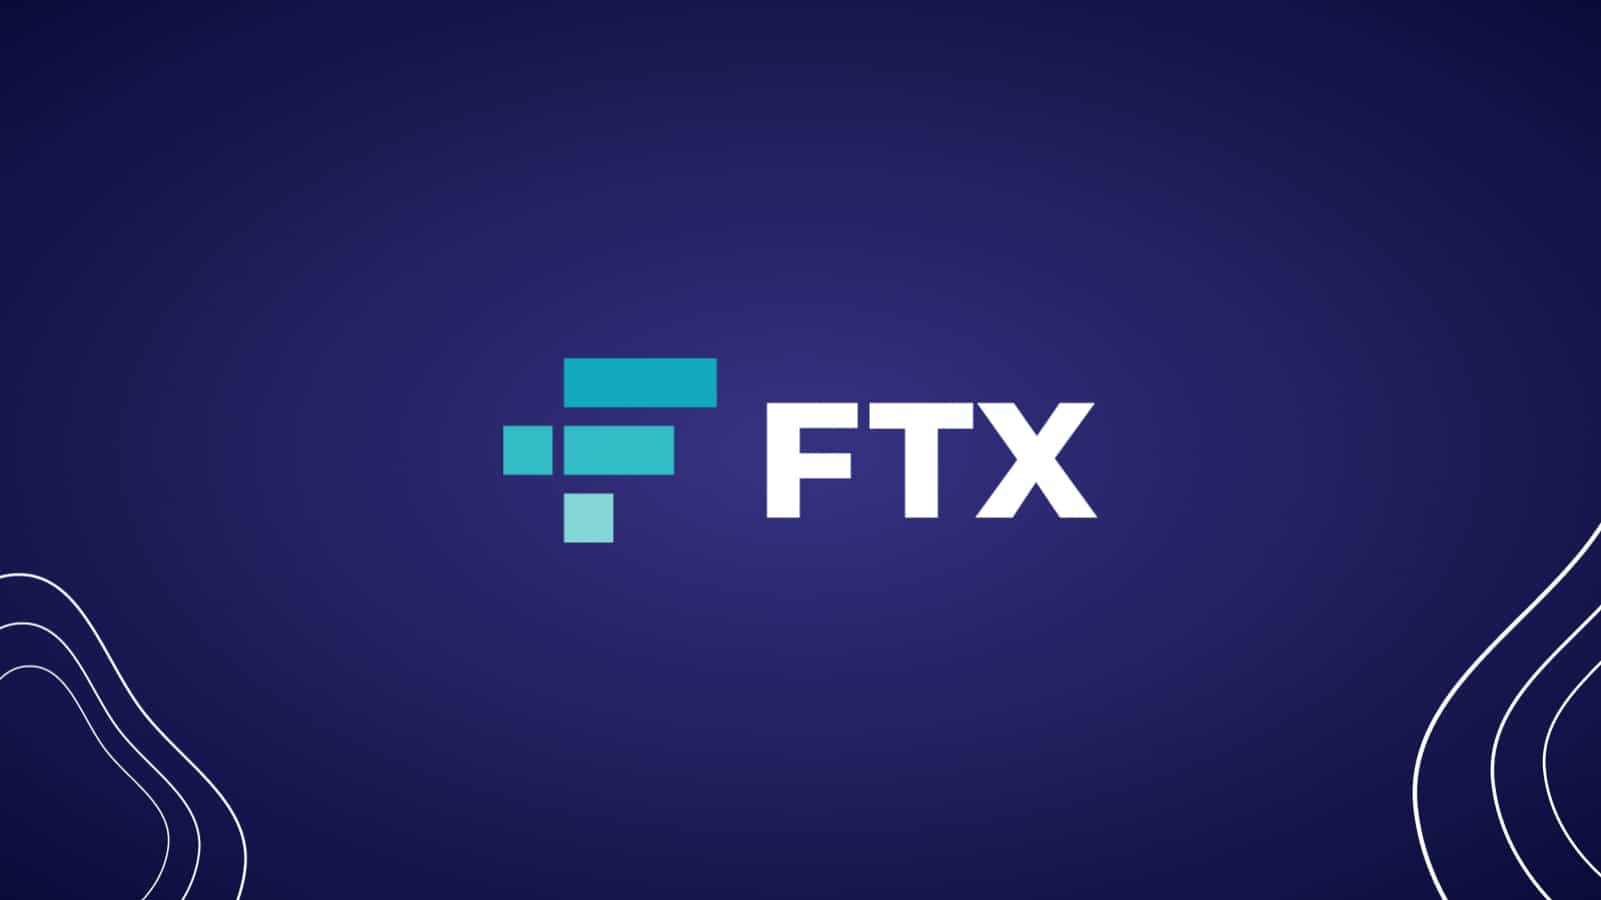 Ftx Review Featured Image